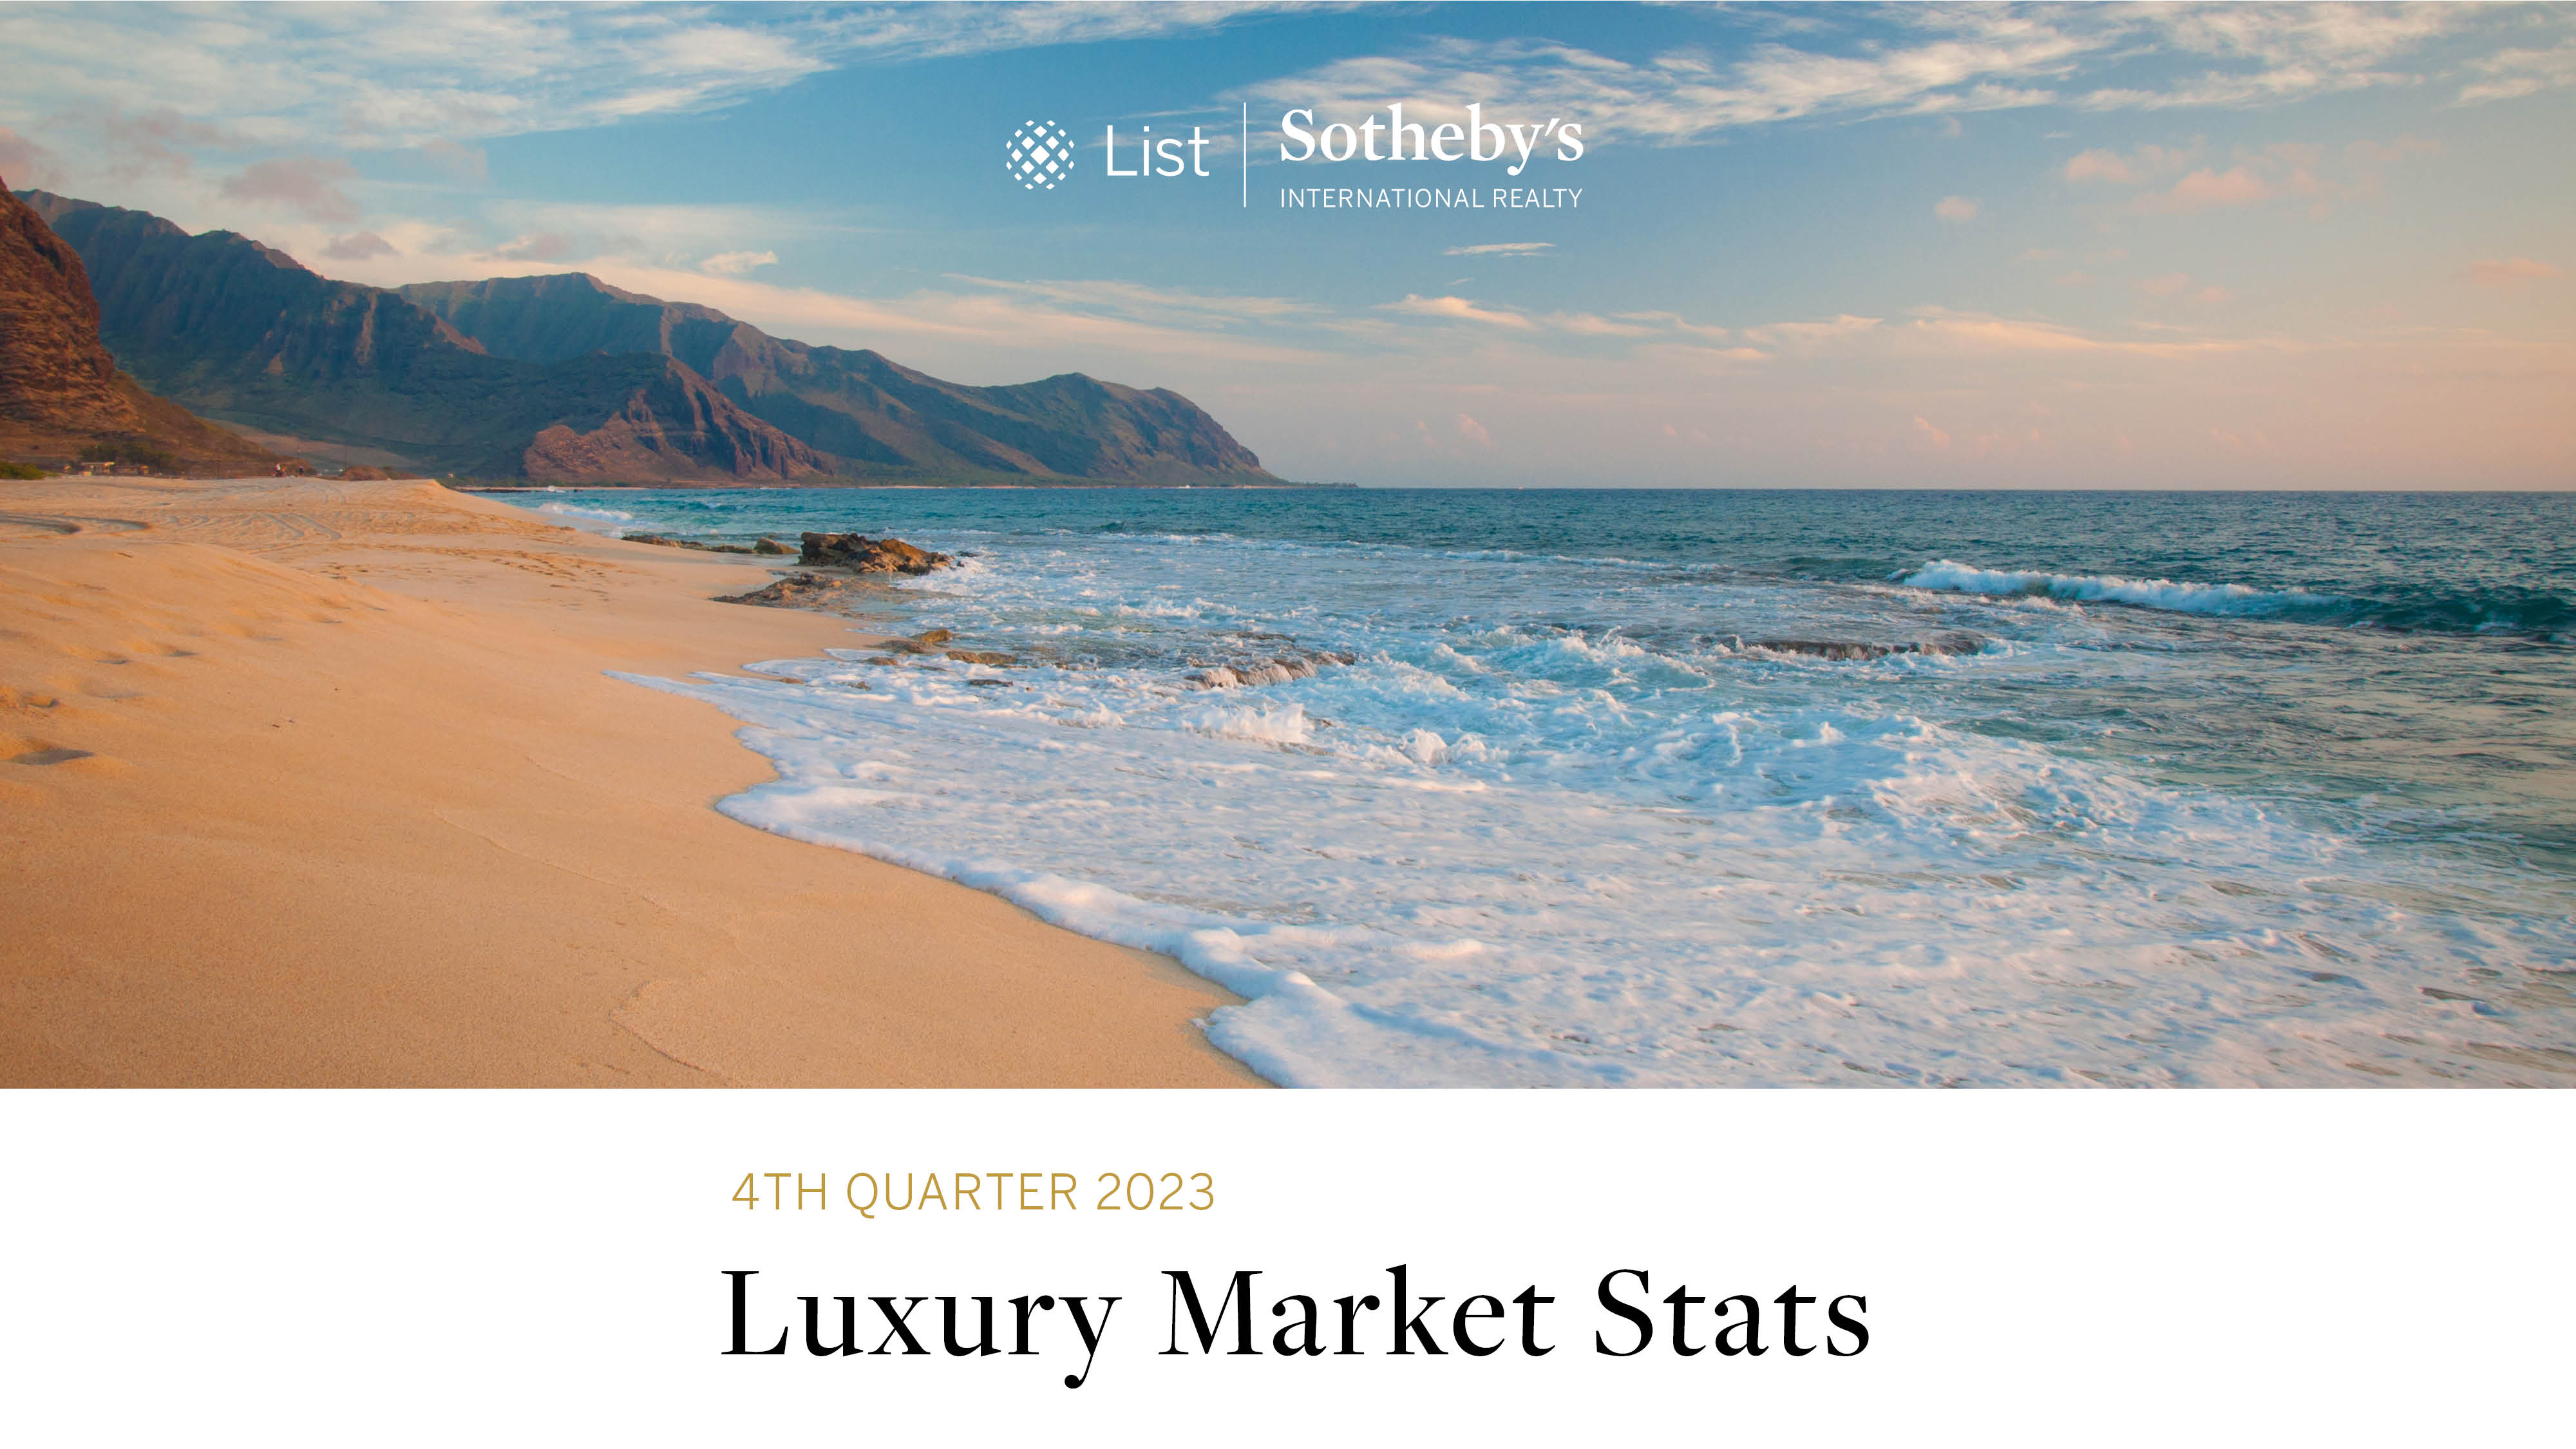 Text saying "List Sotheby's International Realty" above an image of waves lapping at the beach with a mountain in the distance